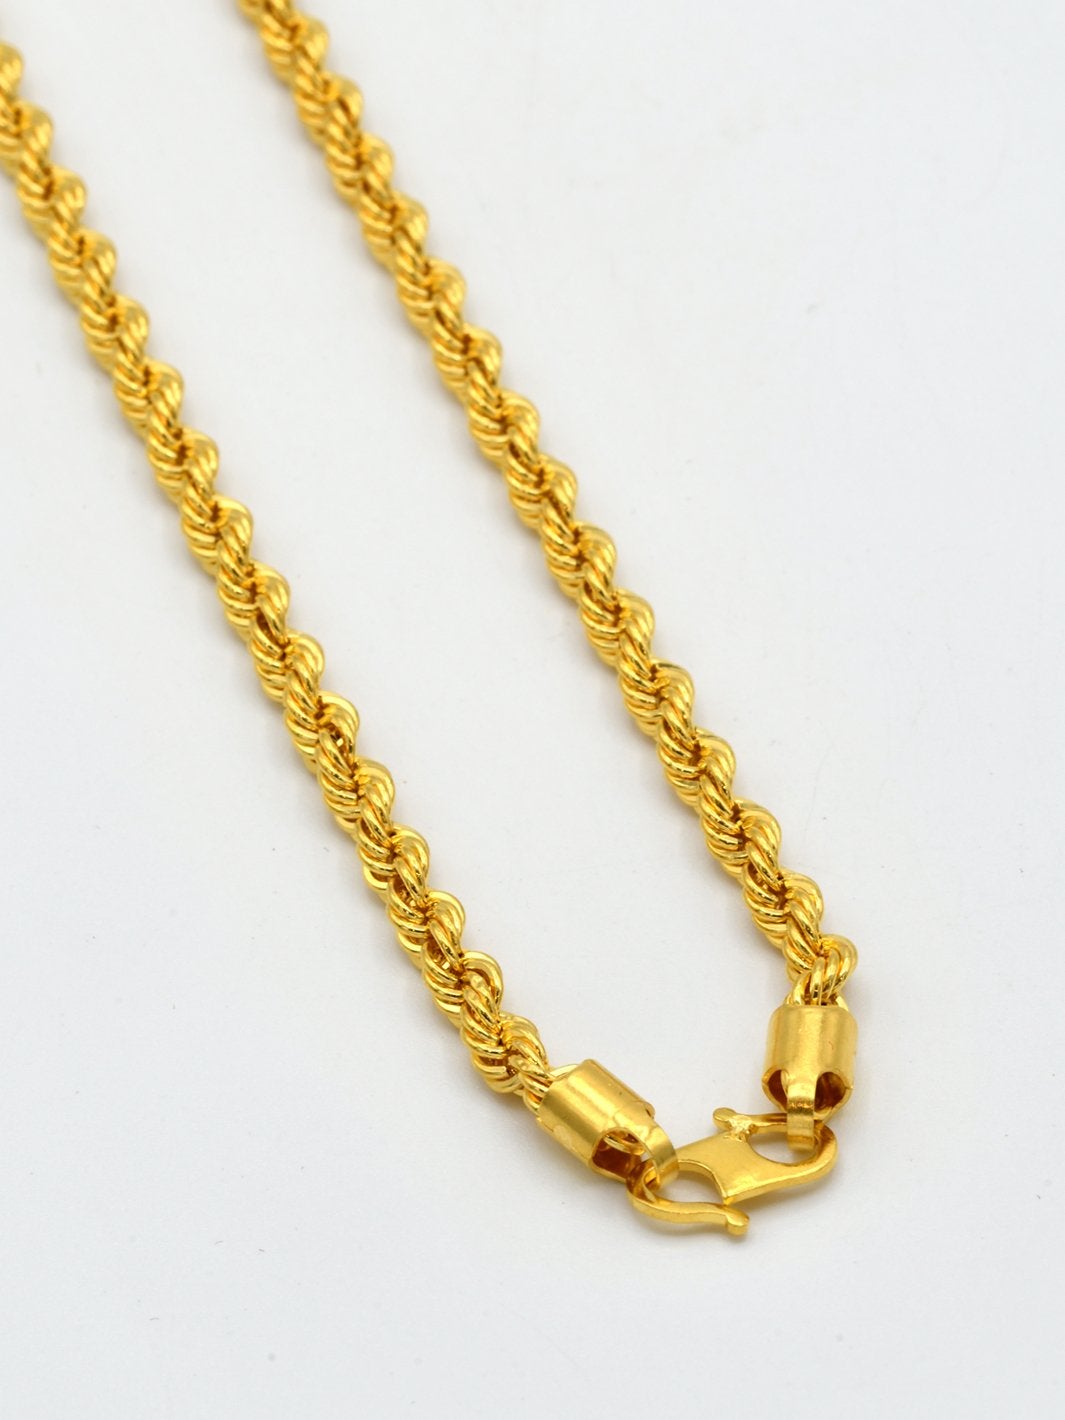 22ct Gold Hollow Rope Chain - 55cm - Roop Darshan